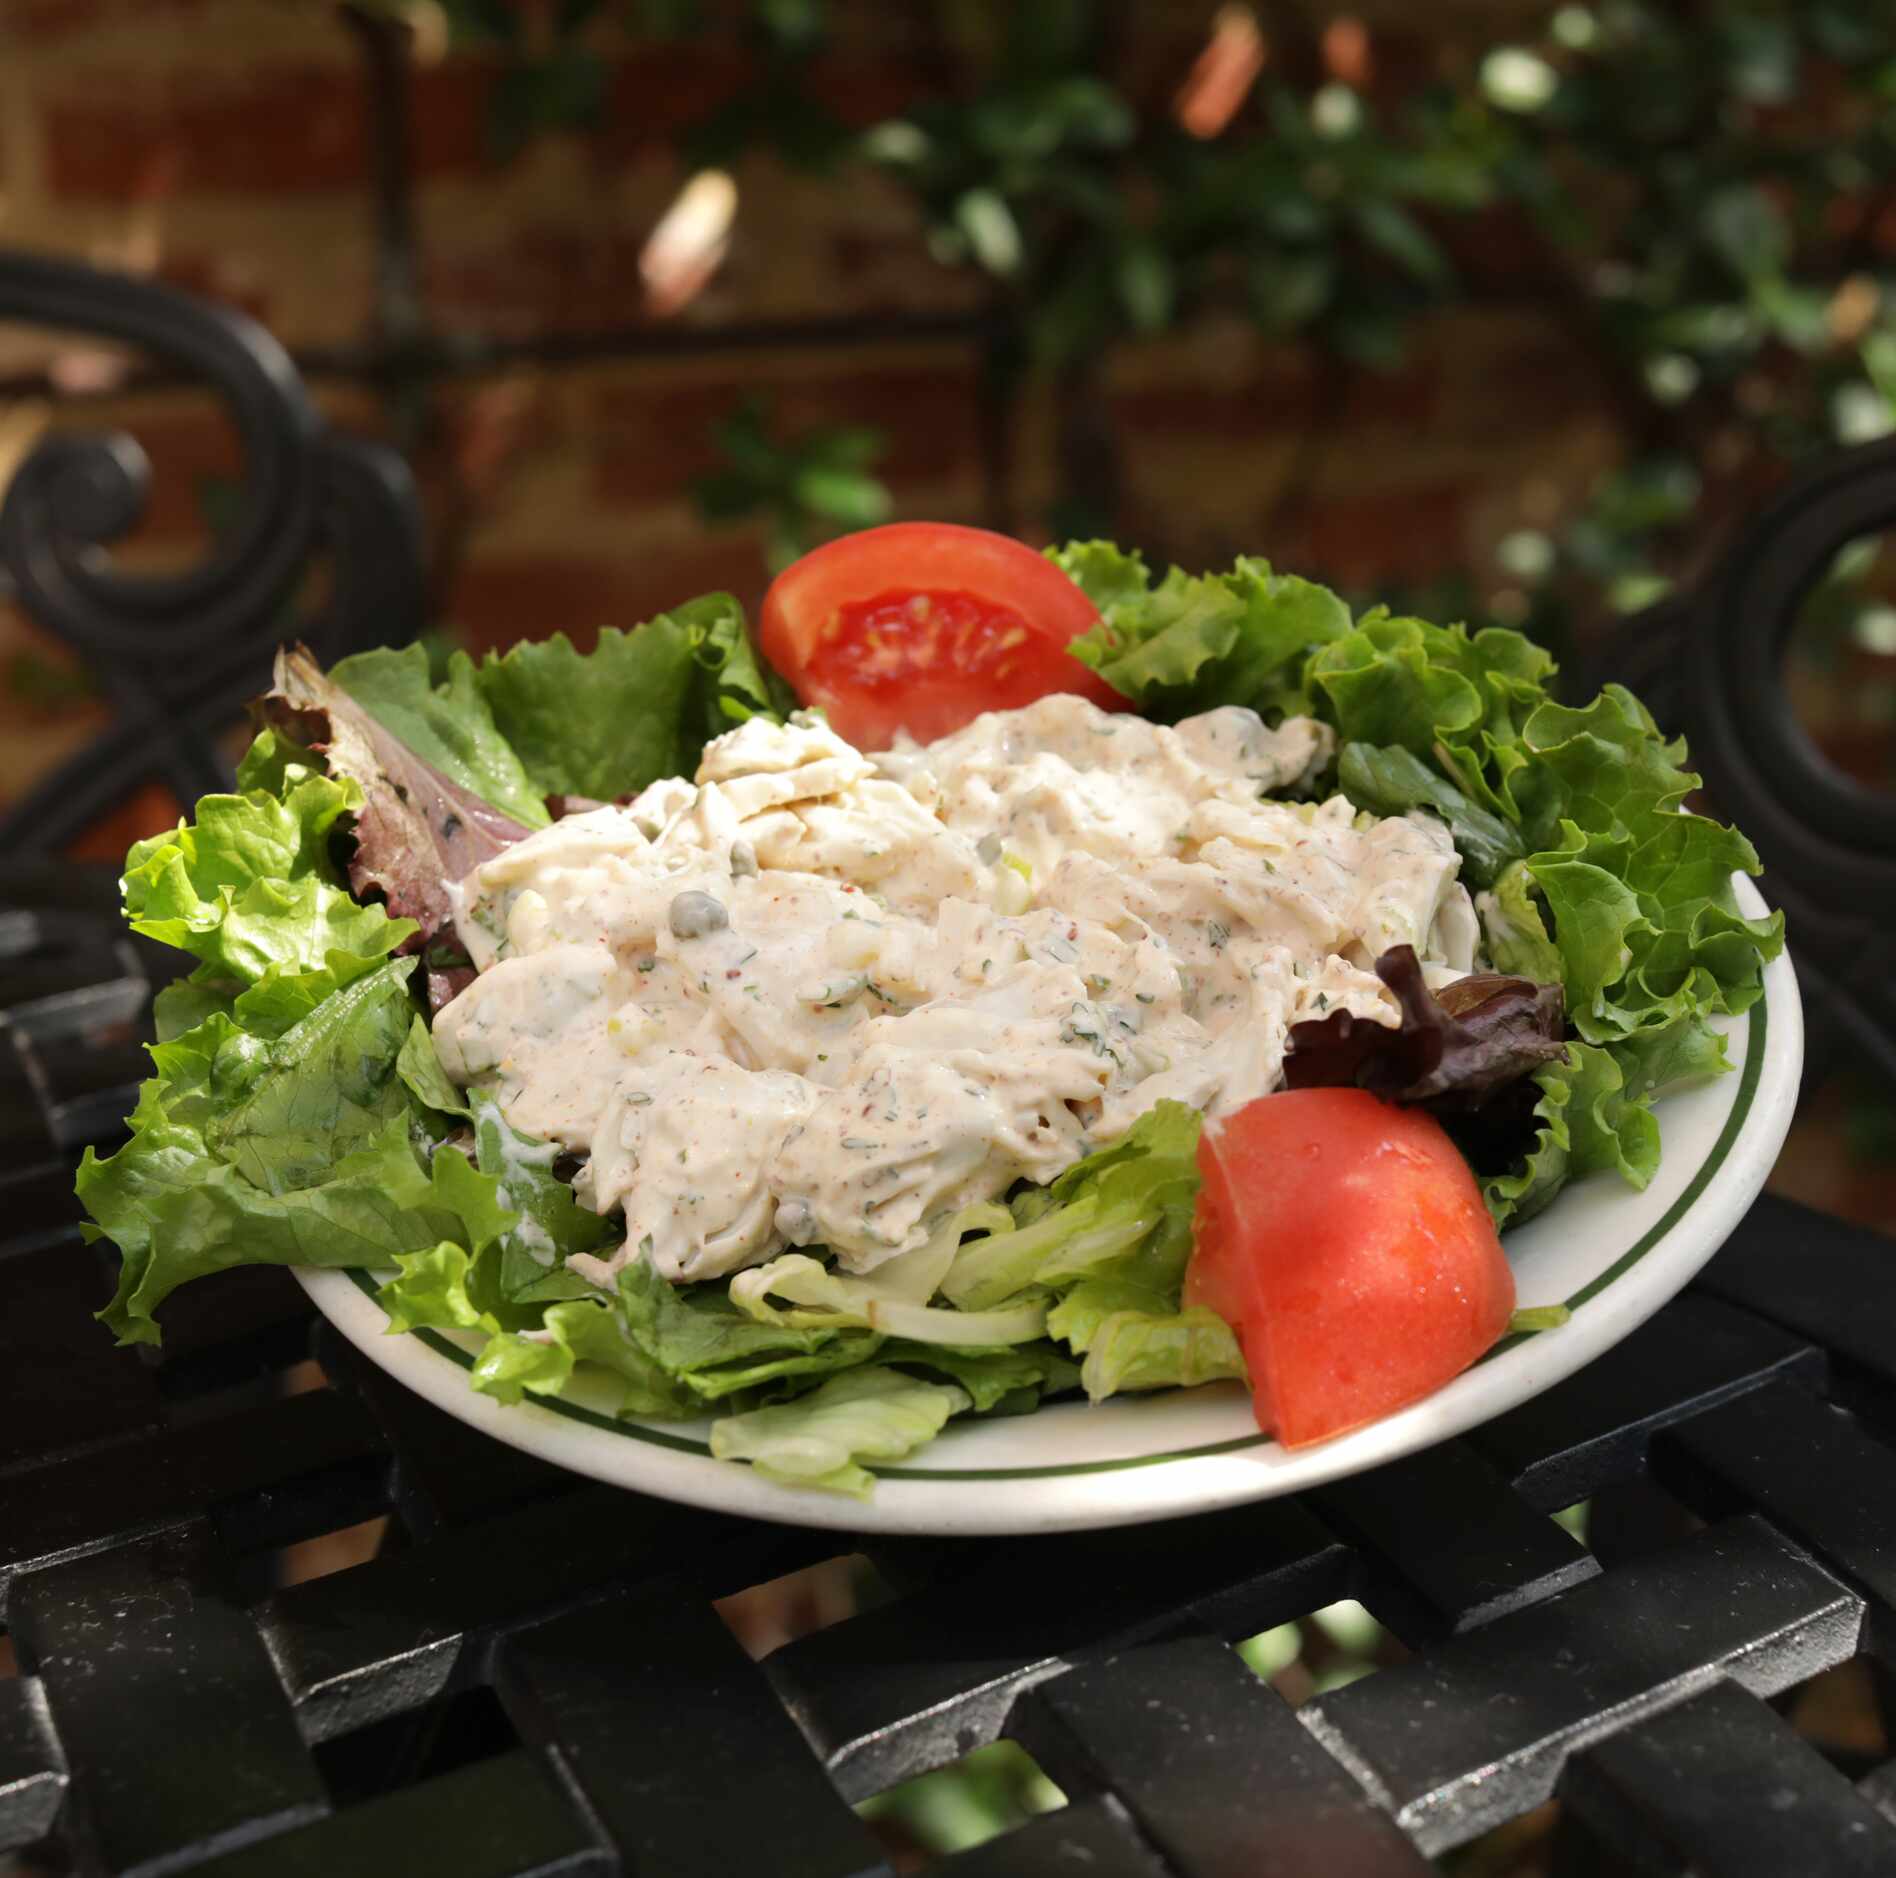 The jumbo lump crab meat maison salad is a favorite of Mary Kay Story, who is owner Herb...